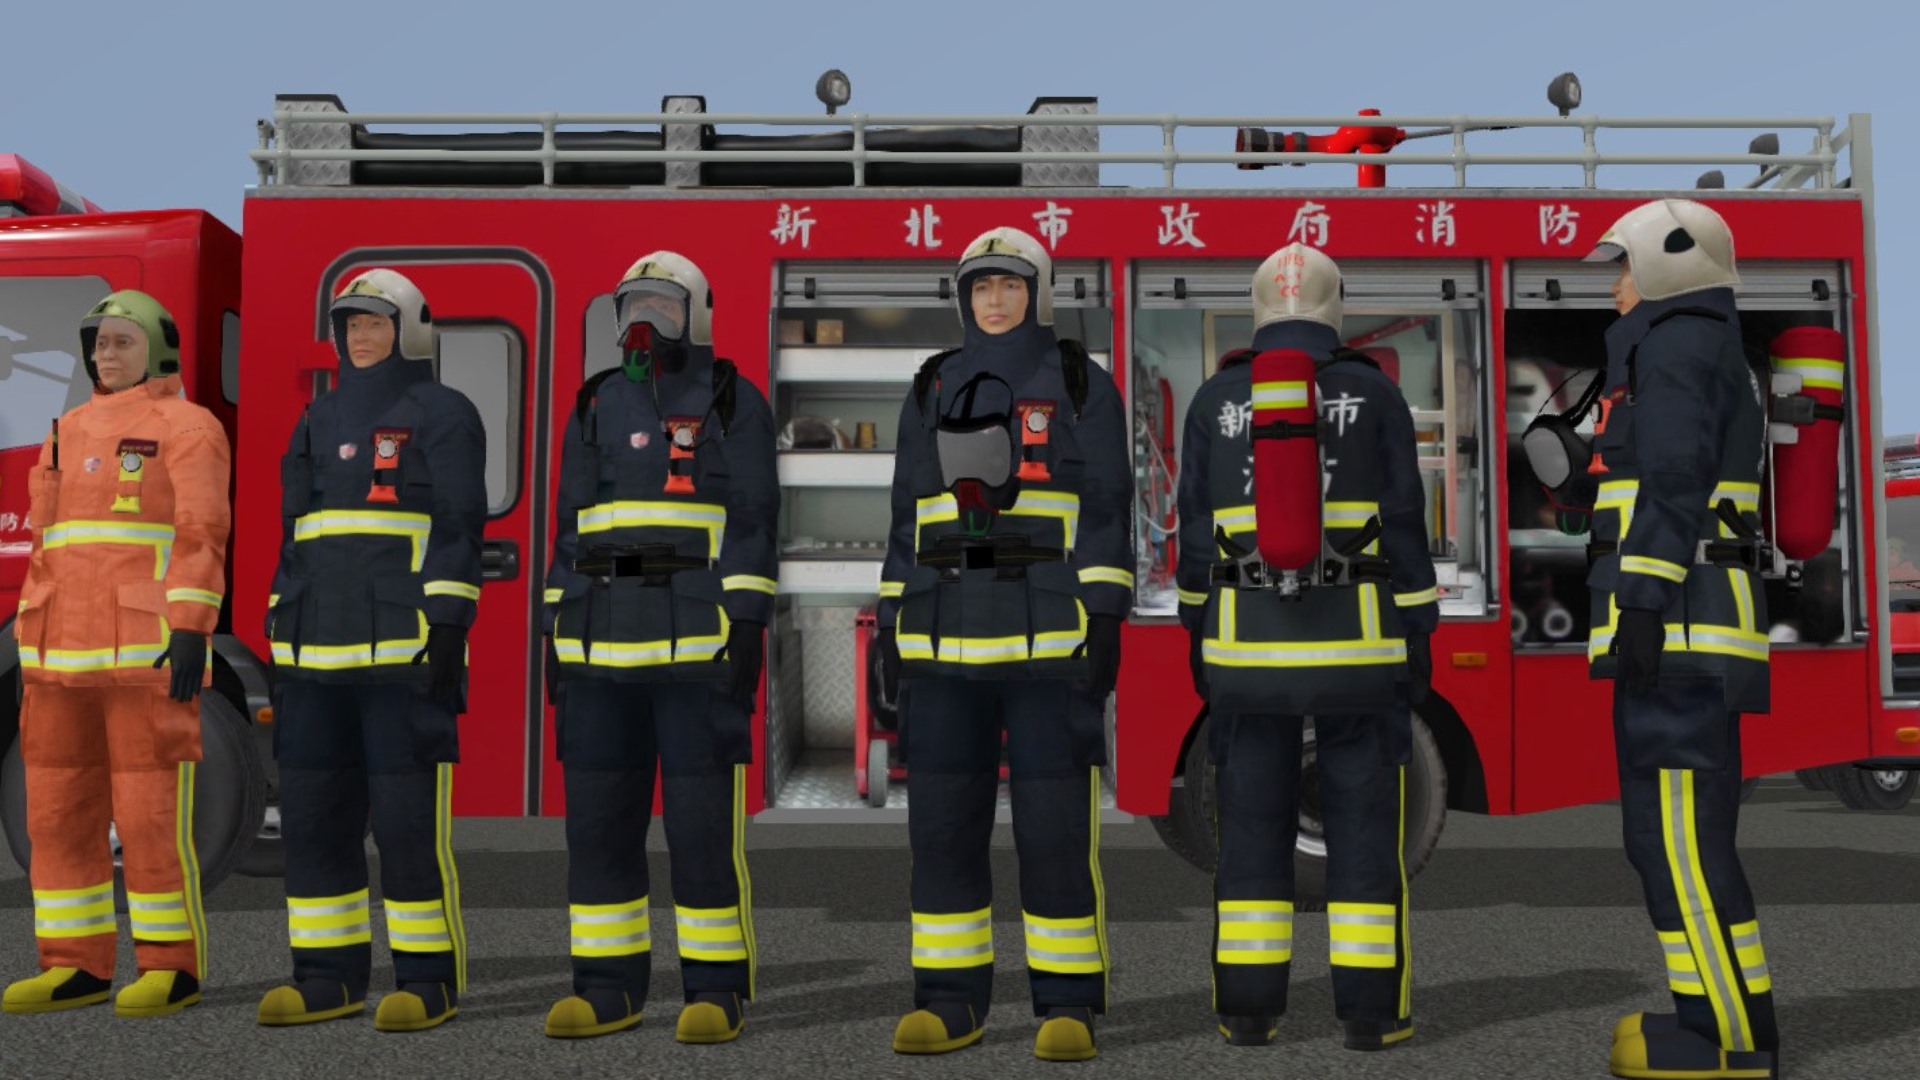 Local Taiwanese fire crew in front of their truck in the simulated ADMS environment to be used for command training.